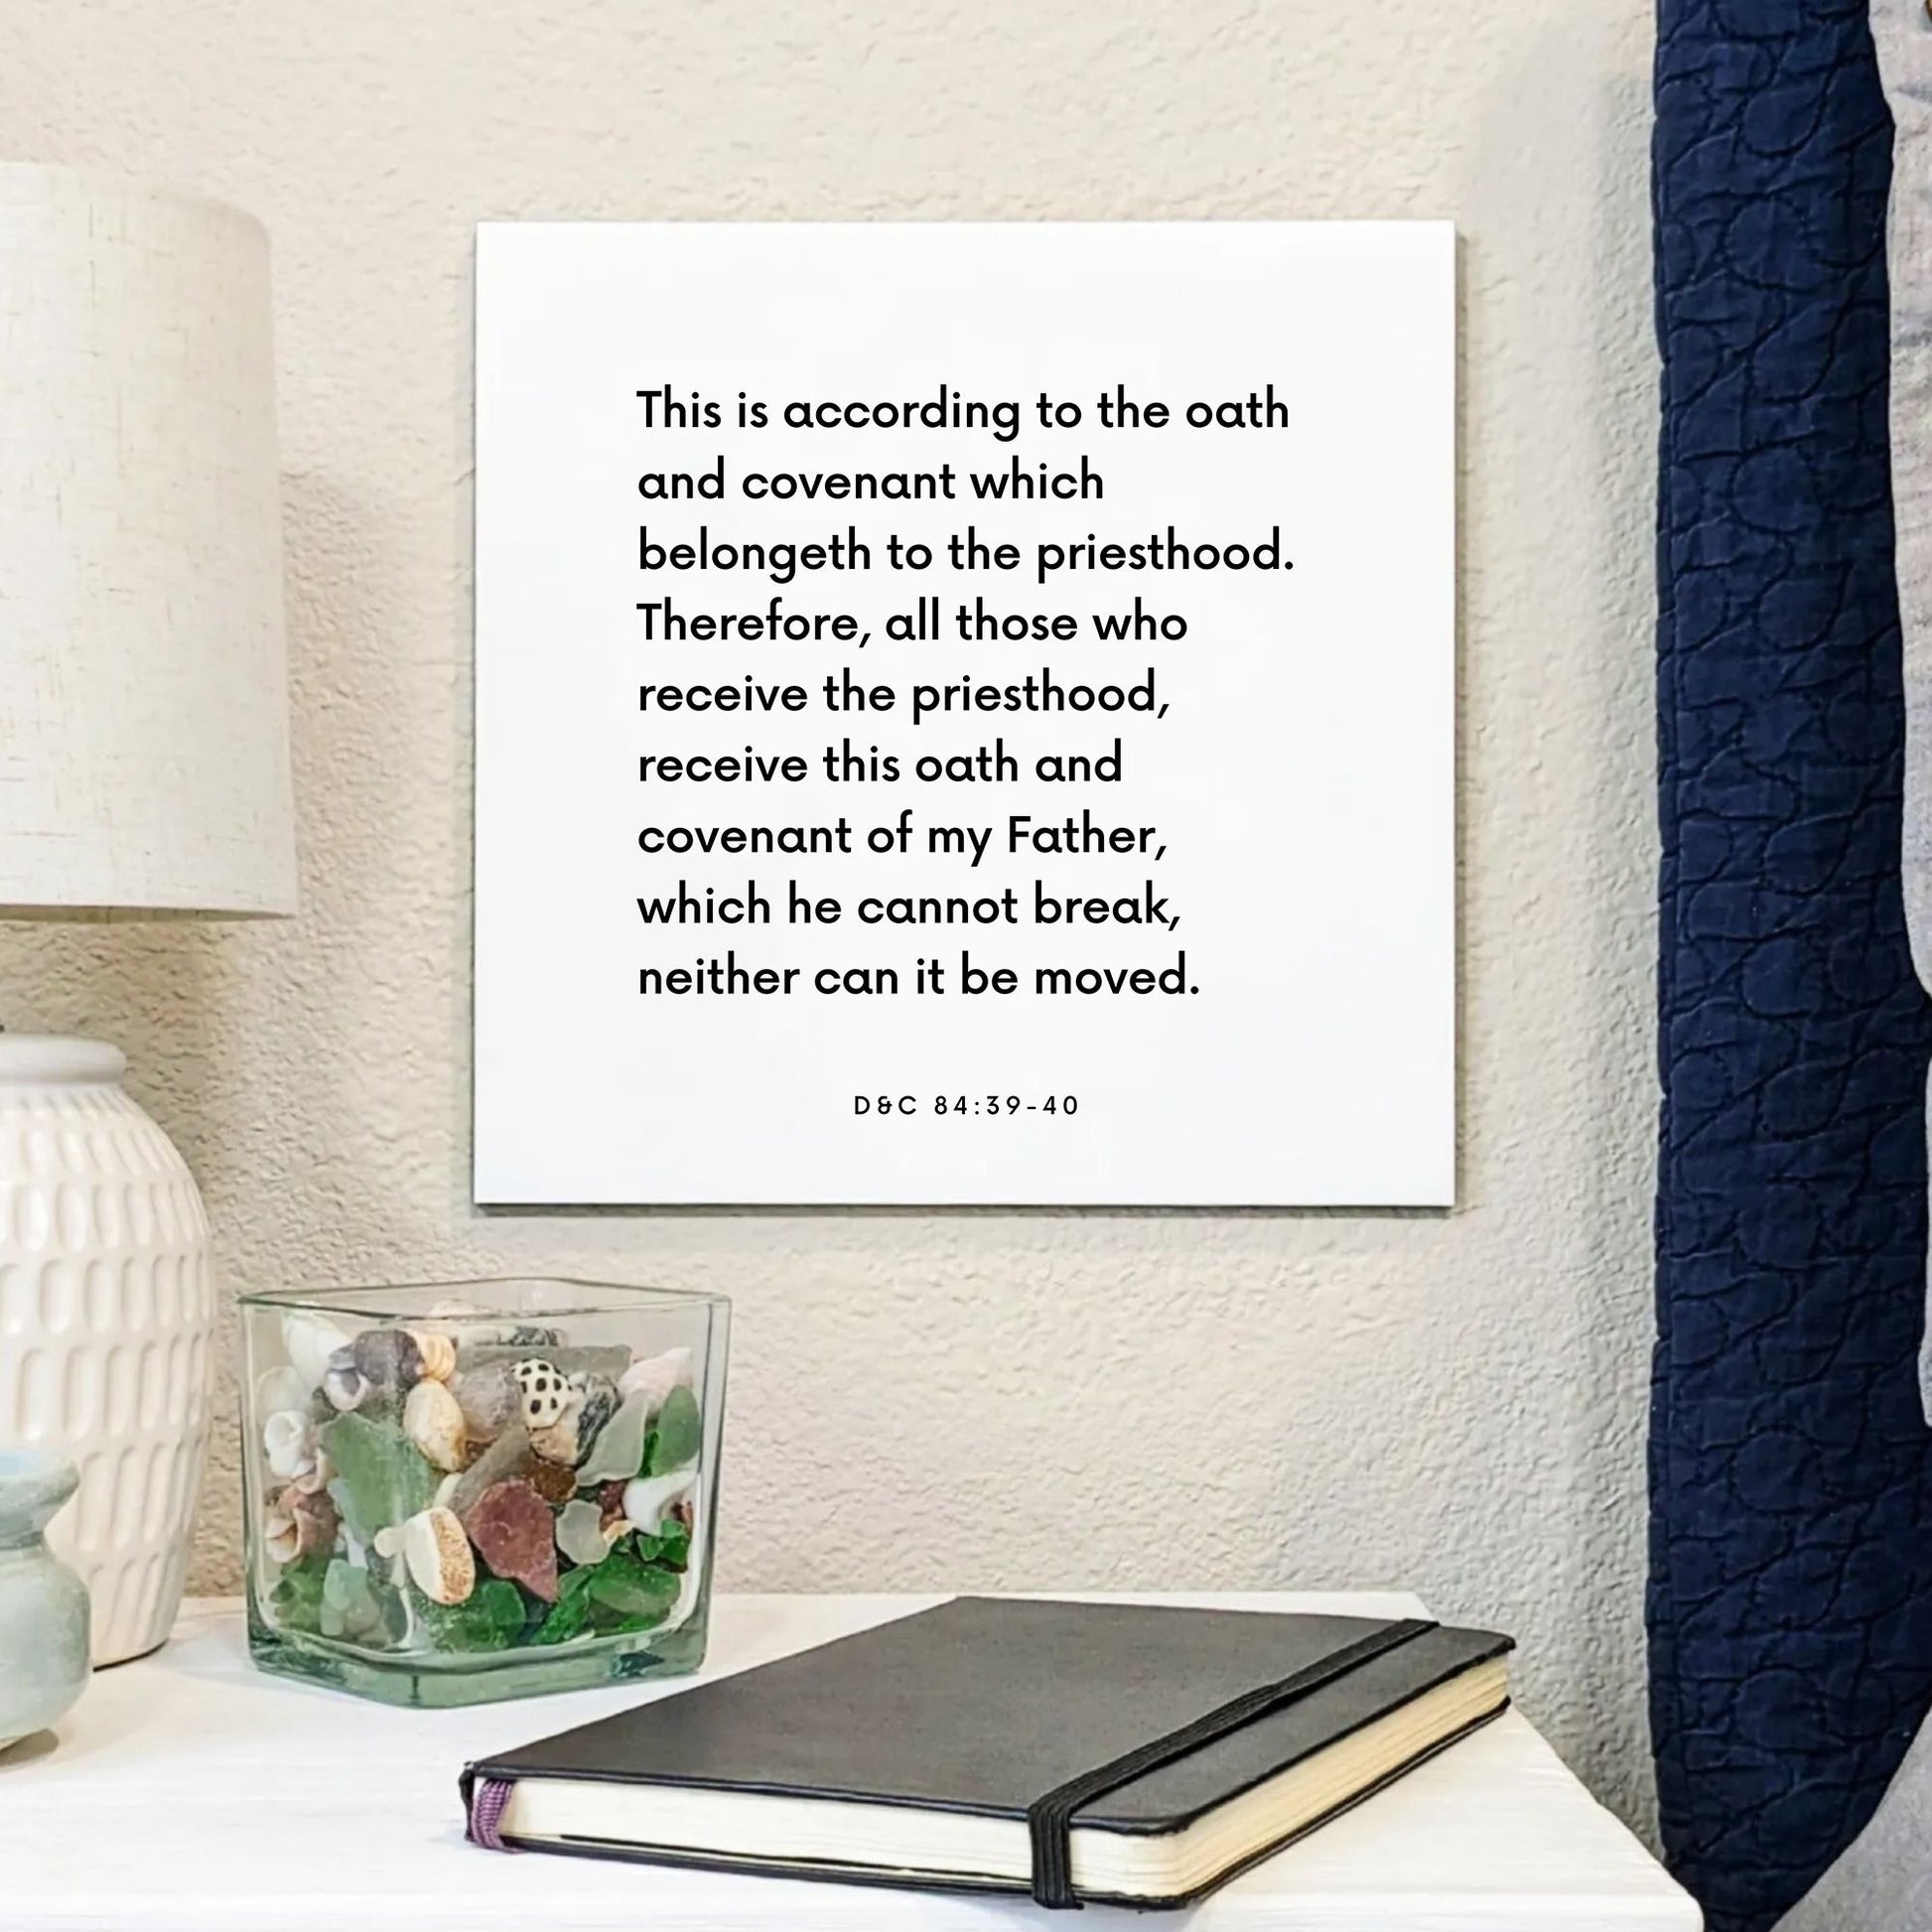 Bedside mouting of the scripture tile for D&C 84:39-40 - "This is according to the oath and covenant"